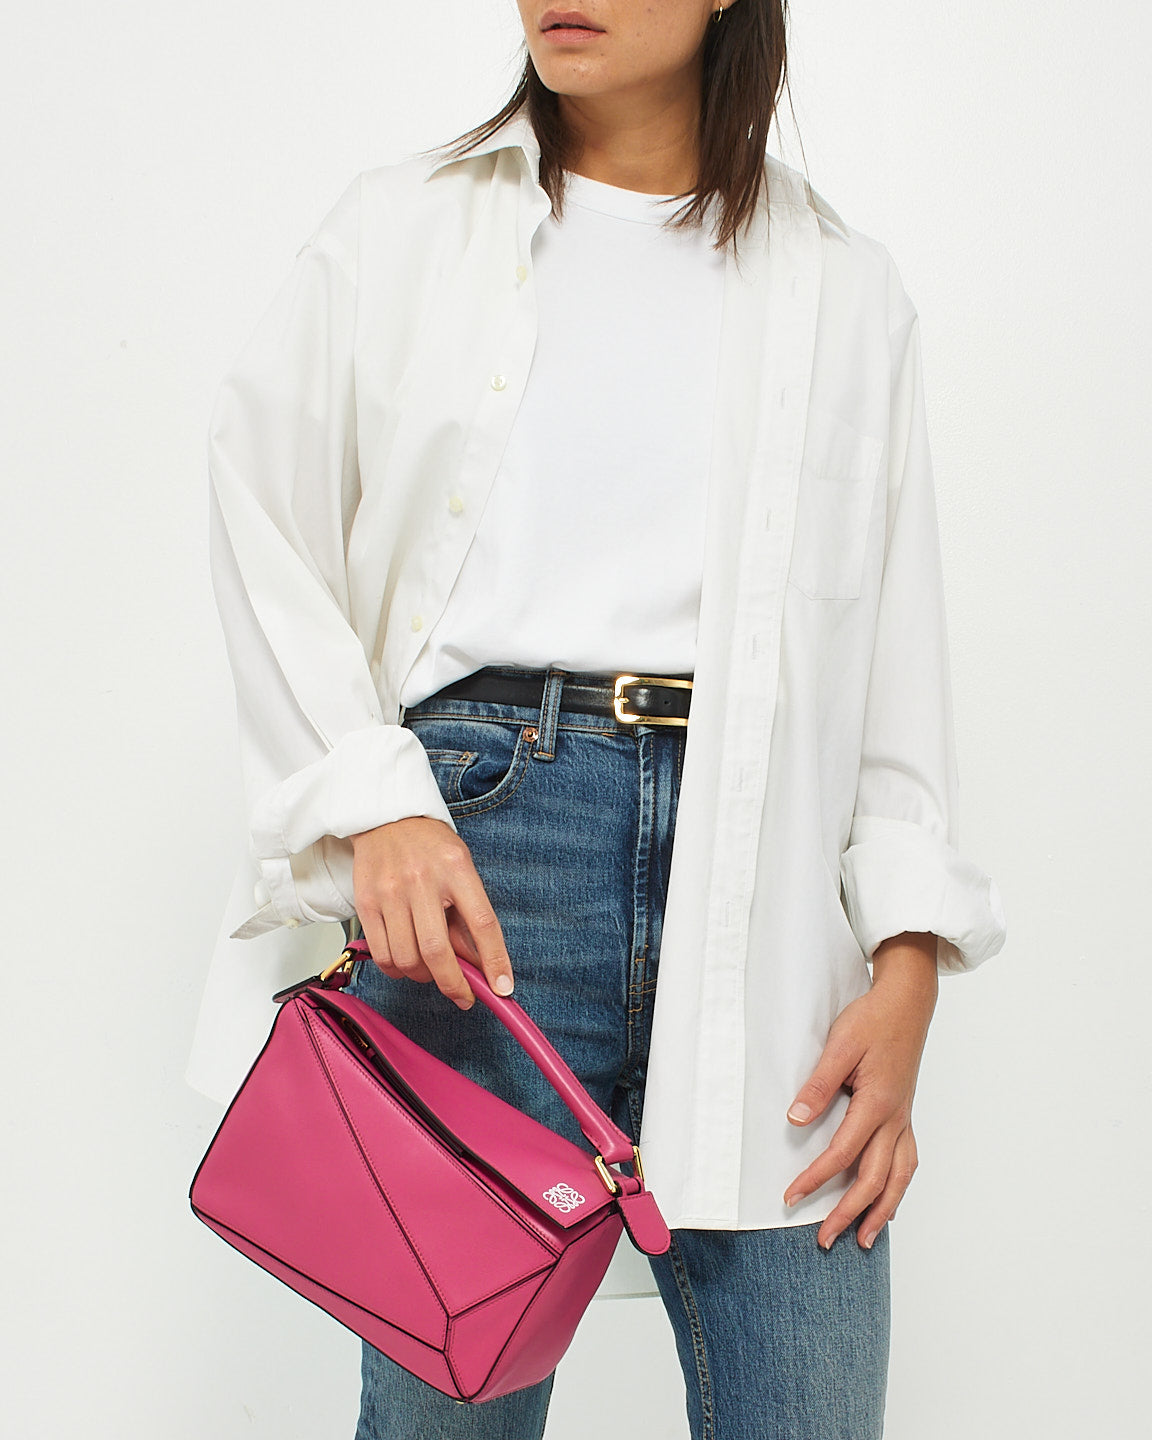 Loewe Pink Fuchsia Leather Small Puzzle Bag